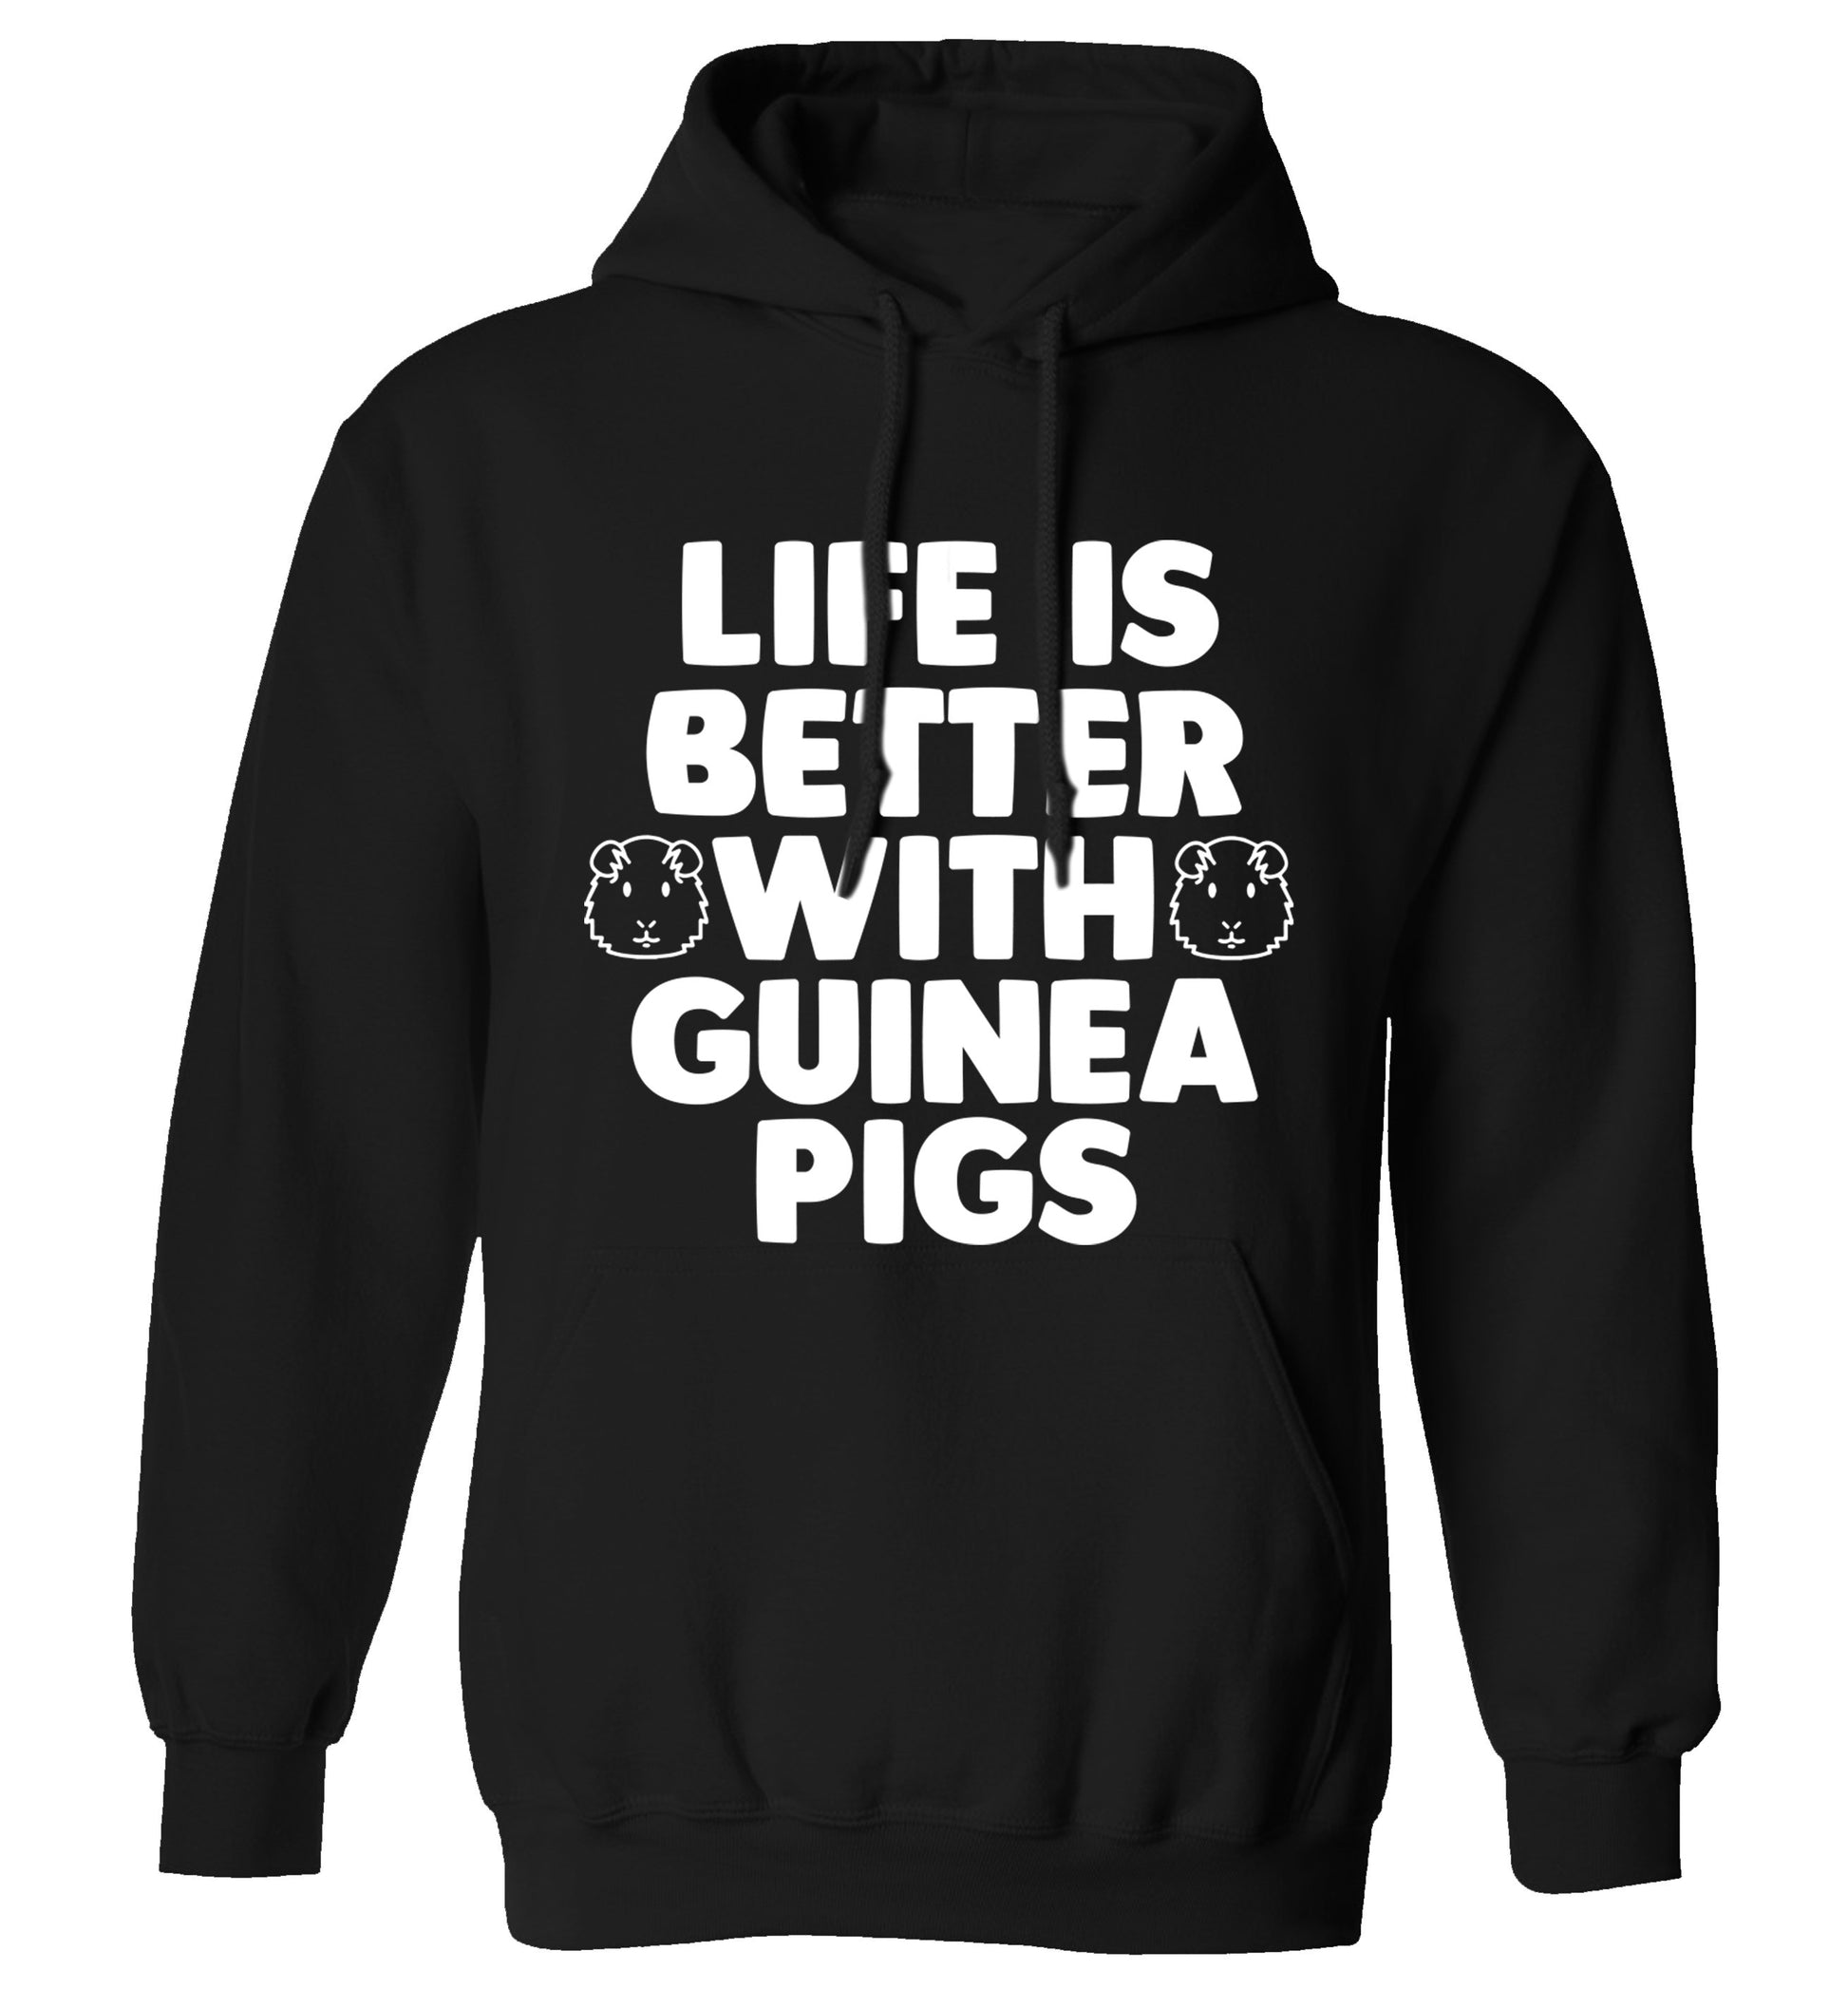 Life is better with guinea pigs adults unisex black hoodie 2XL